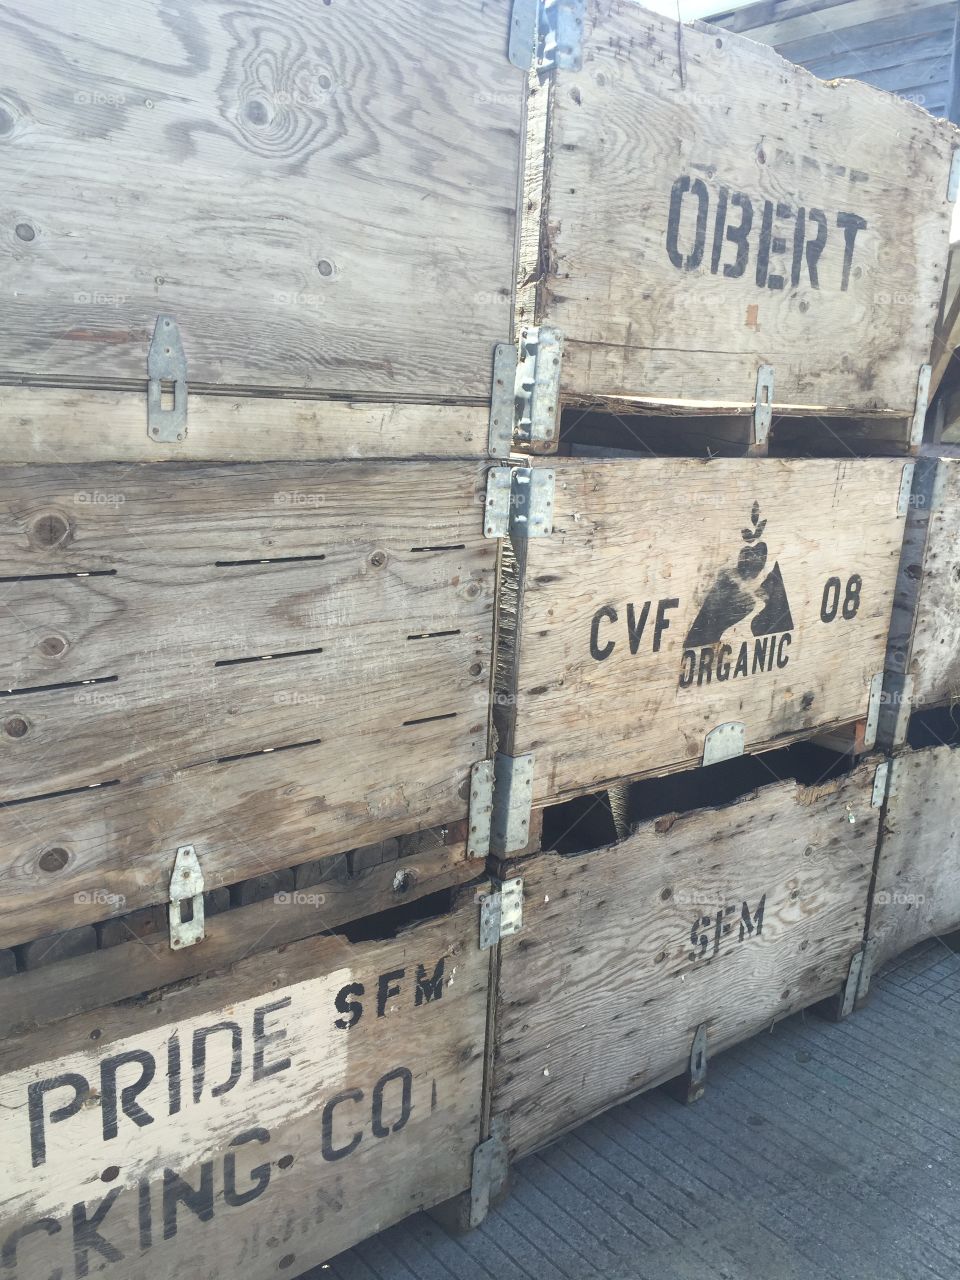 Shipping crates